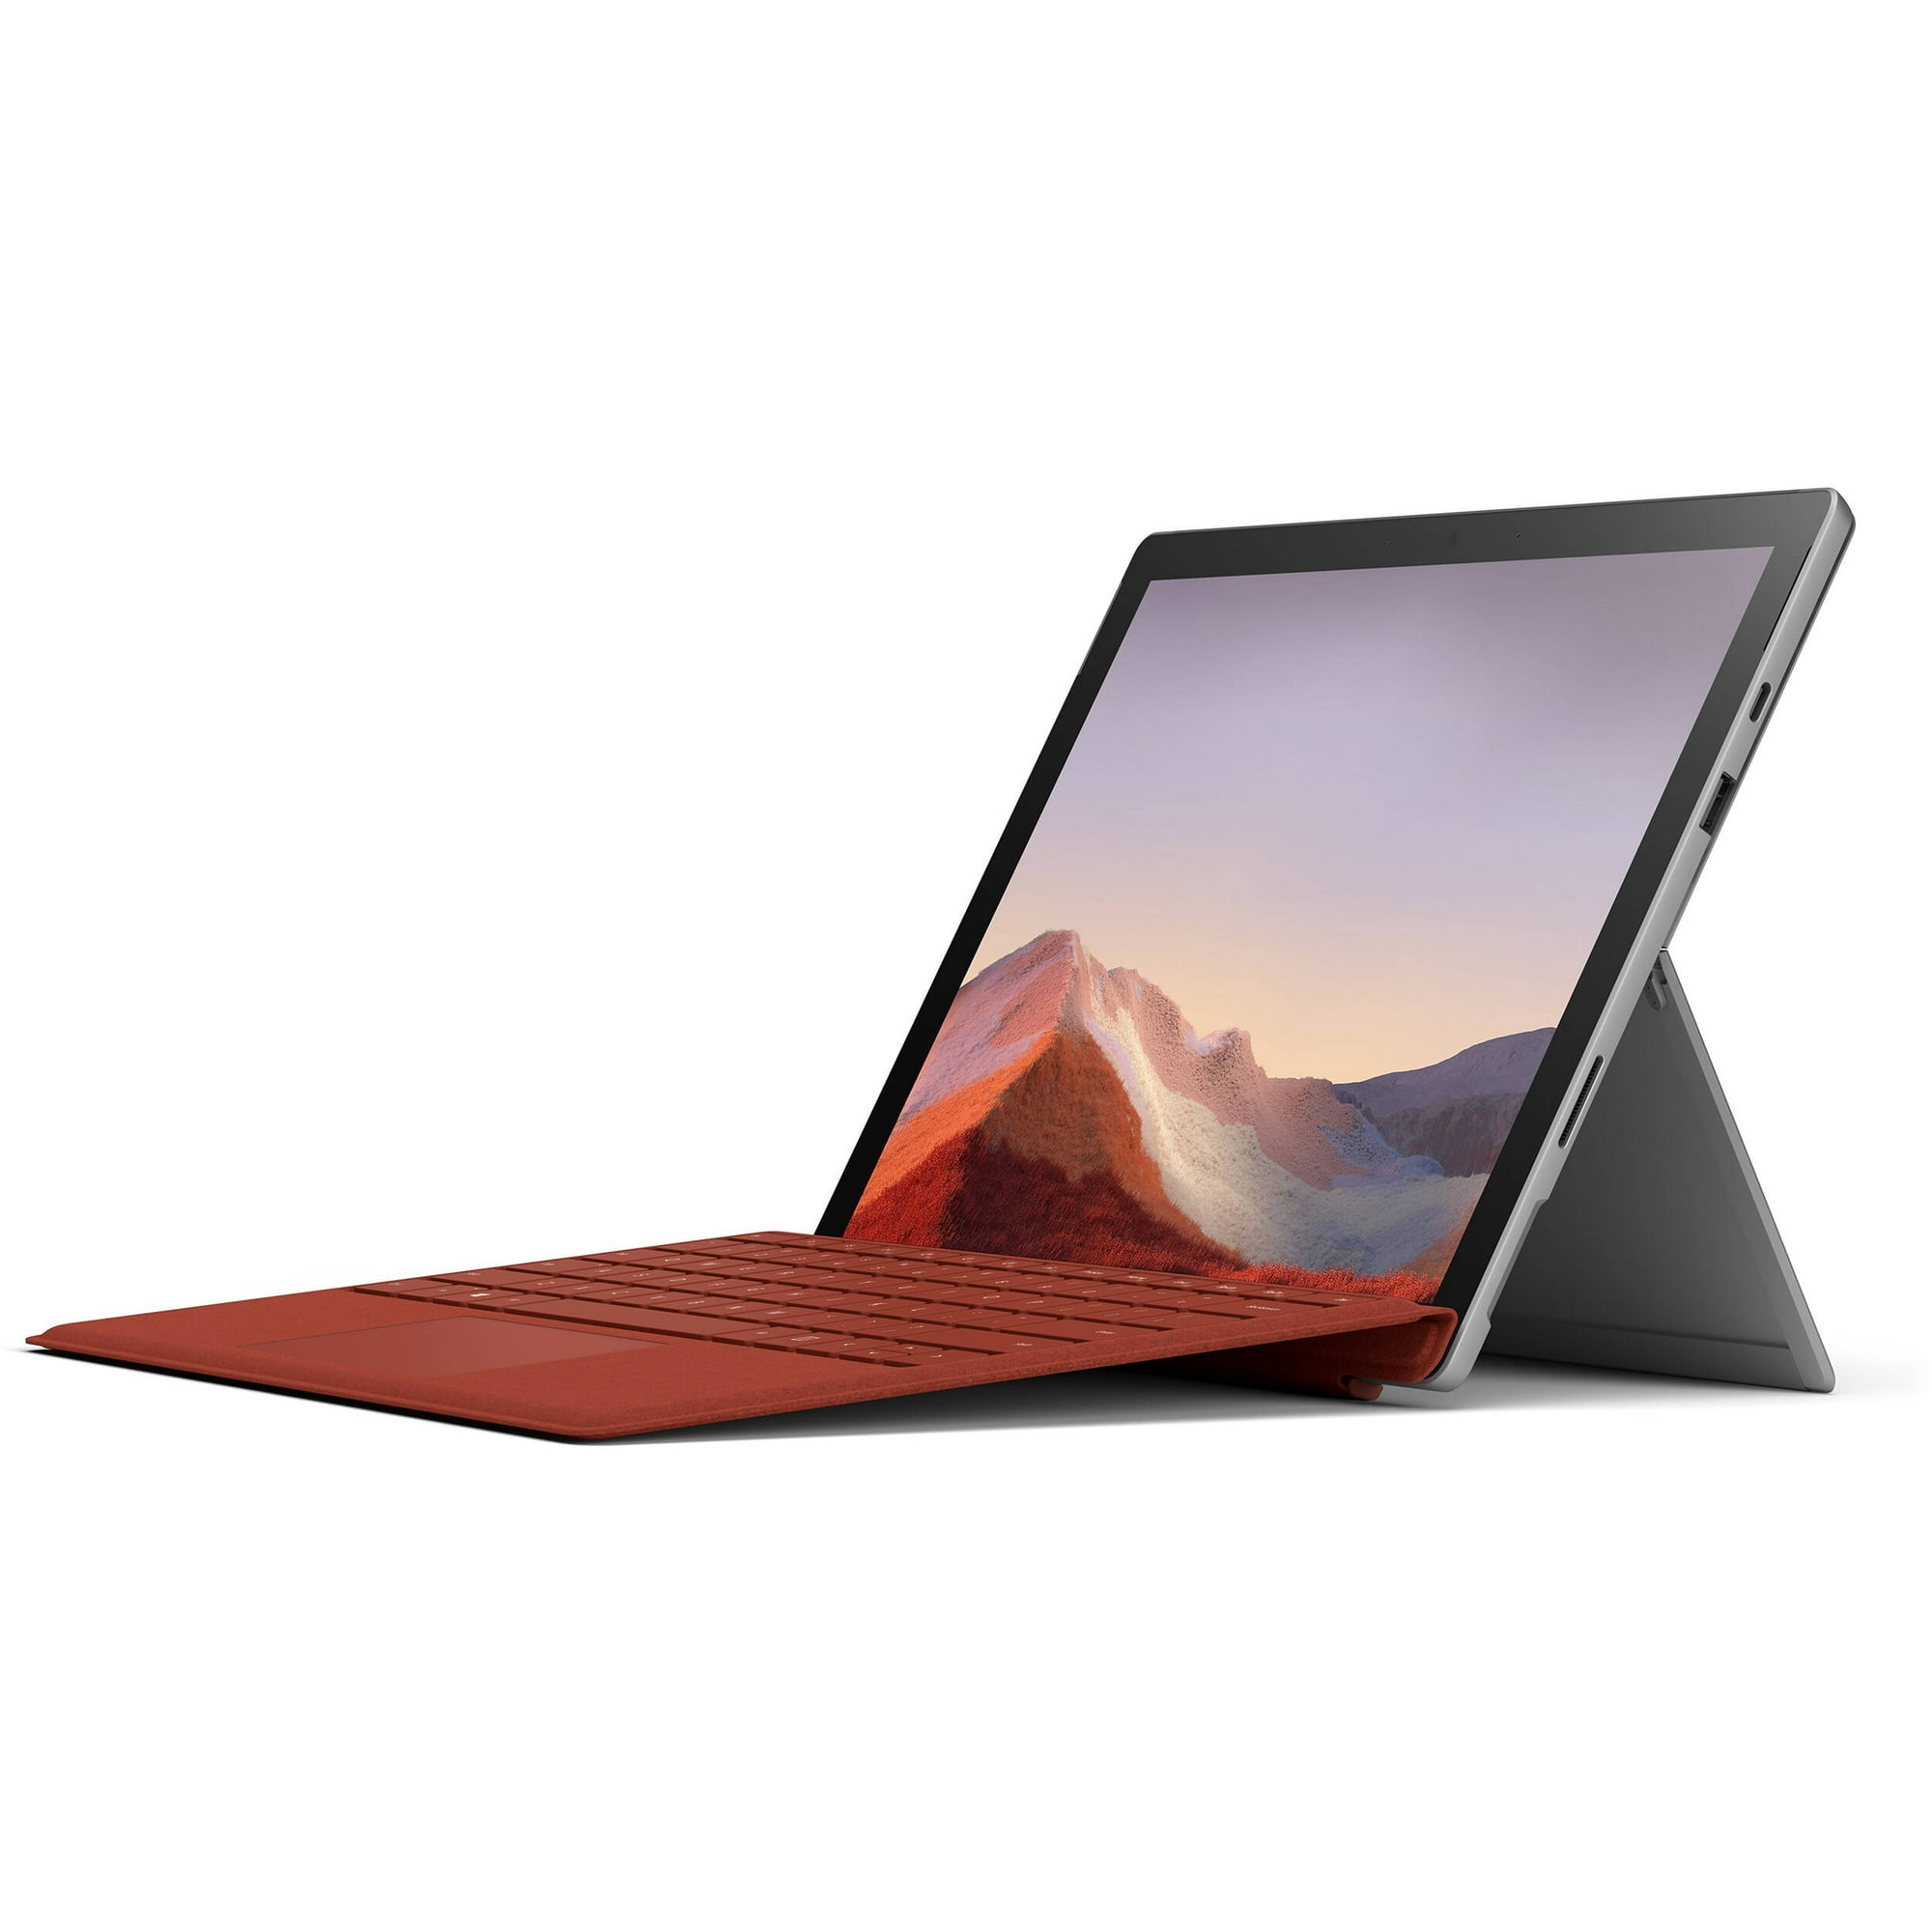 Microsoft Surface Go 2 for Business - Wi-Fi, Intel Core P, 4GB RAM